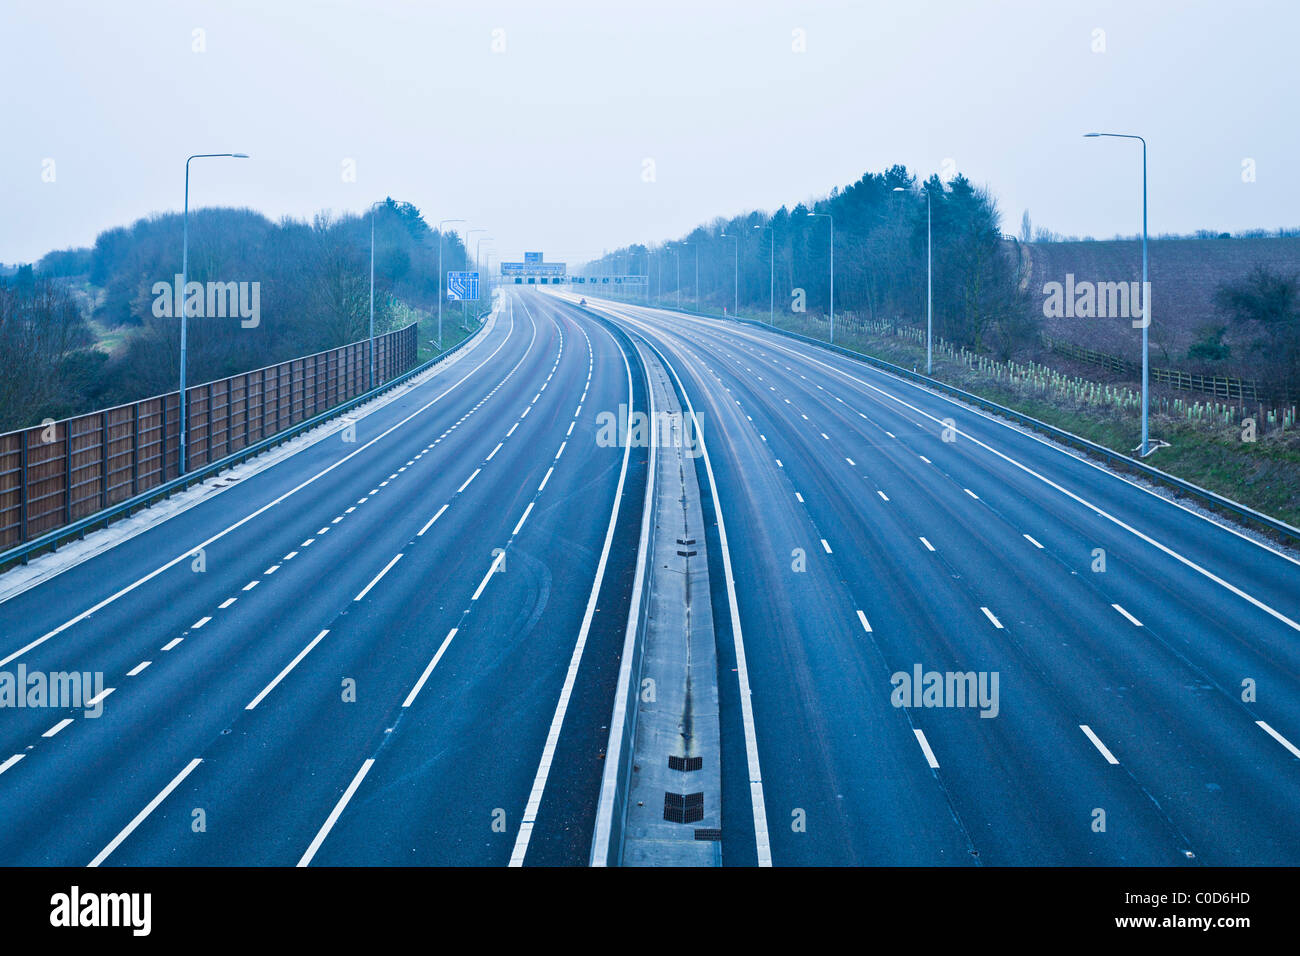 no cars on the M1 motorway near junction 25 new 4 lane section empty of traffic Stock Photo